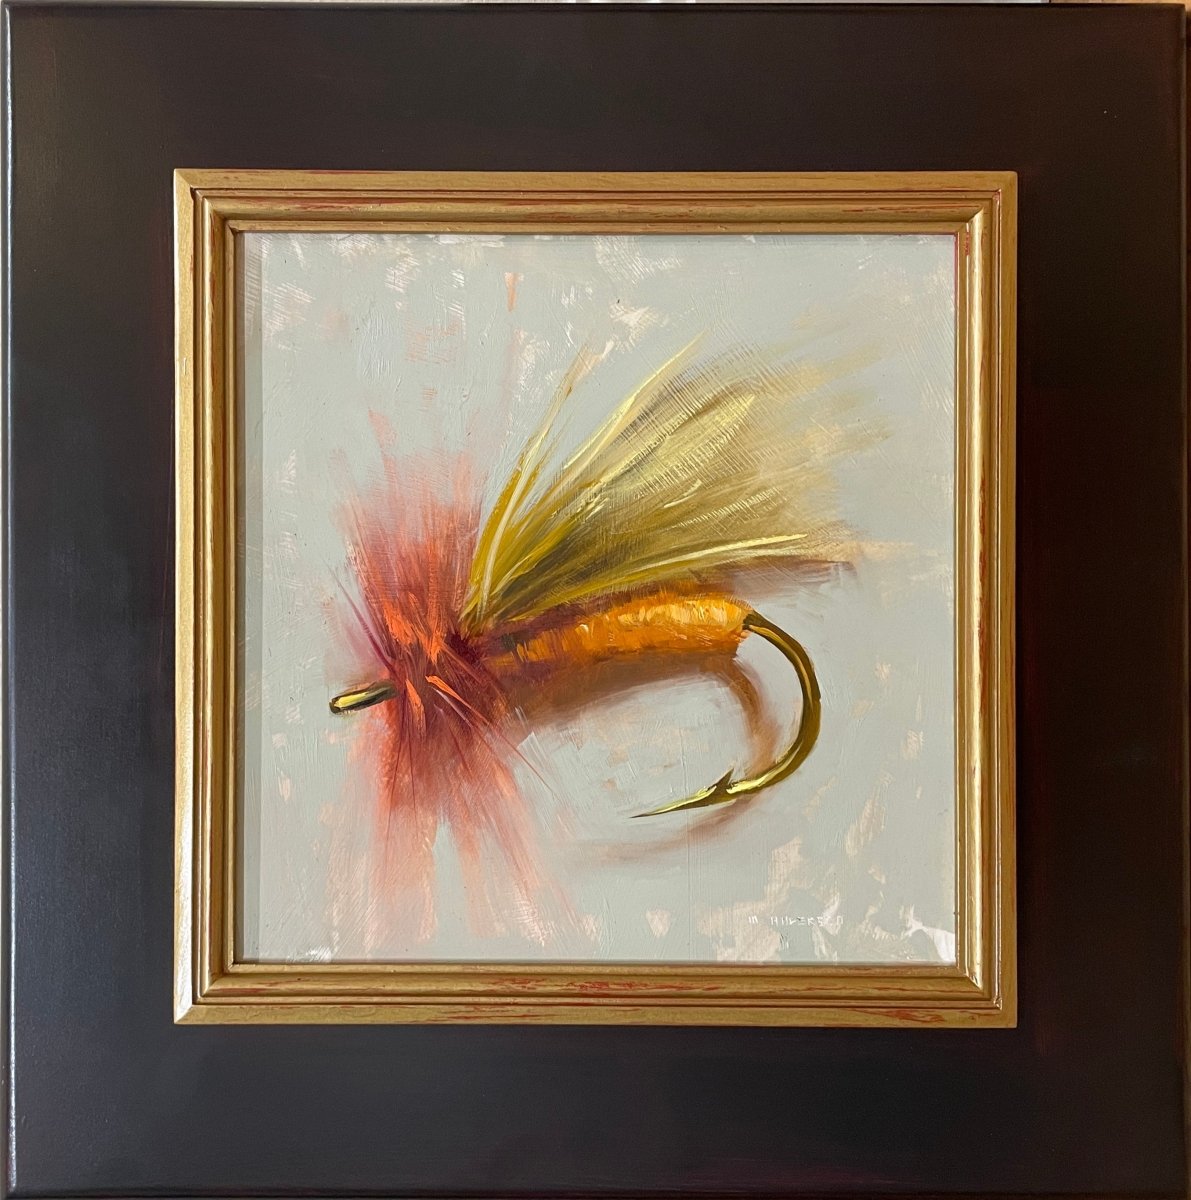 October Caddis by Marc Anderson at LePrince Galleries